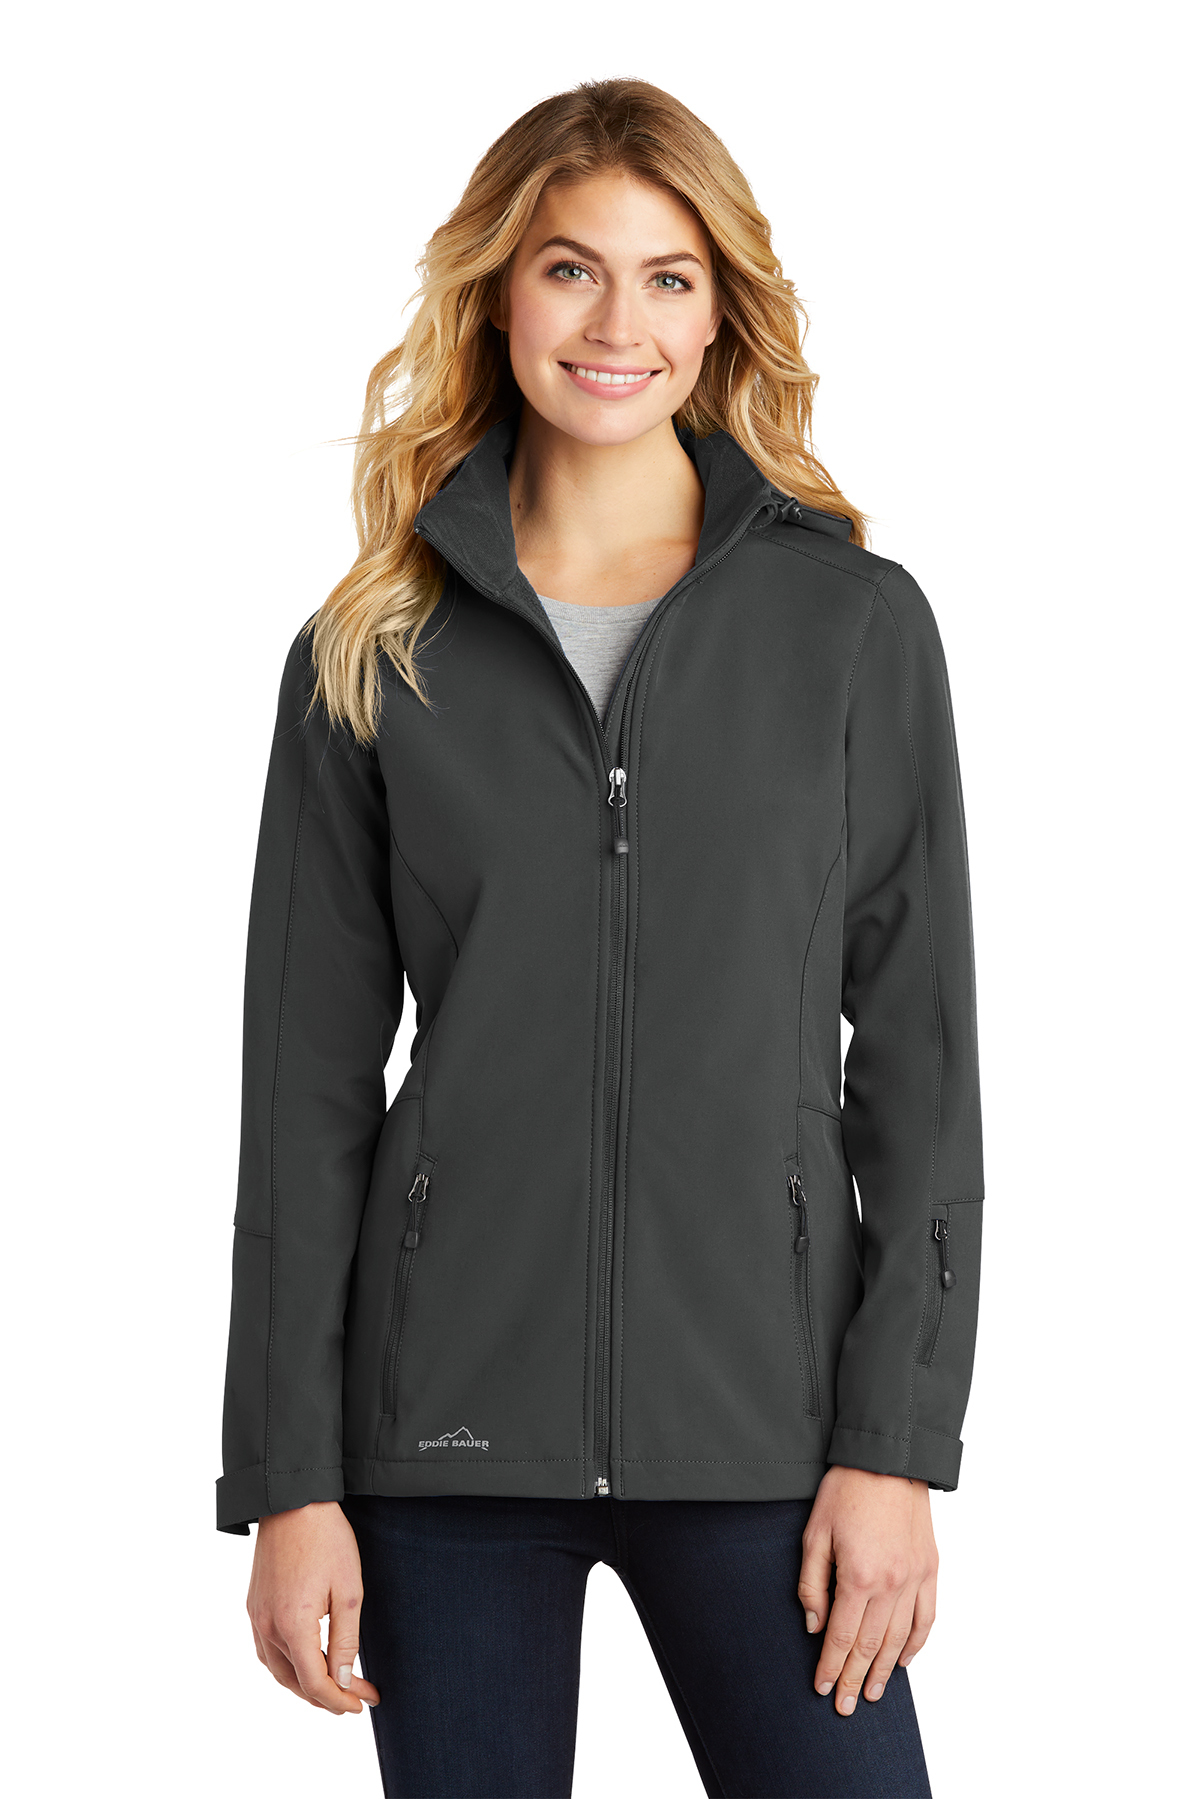 Eddie Bauer Ladies Hooded Soft Shell Parka, Product